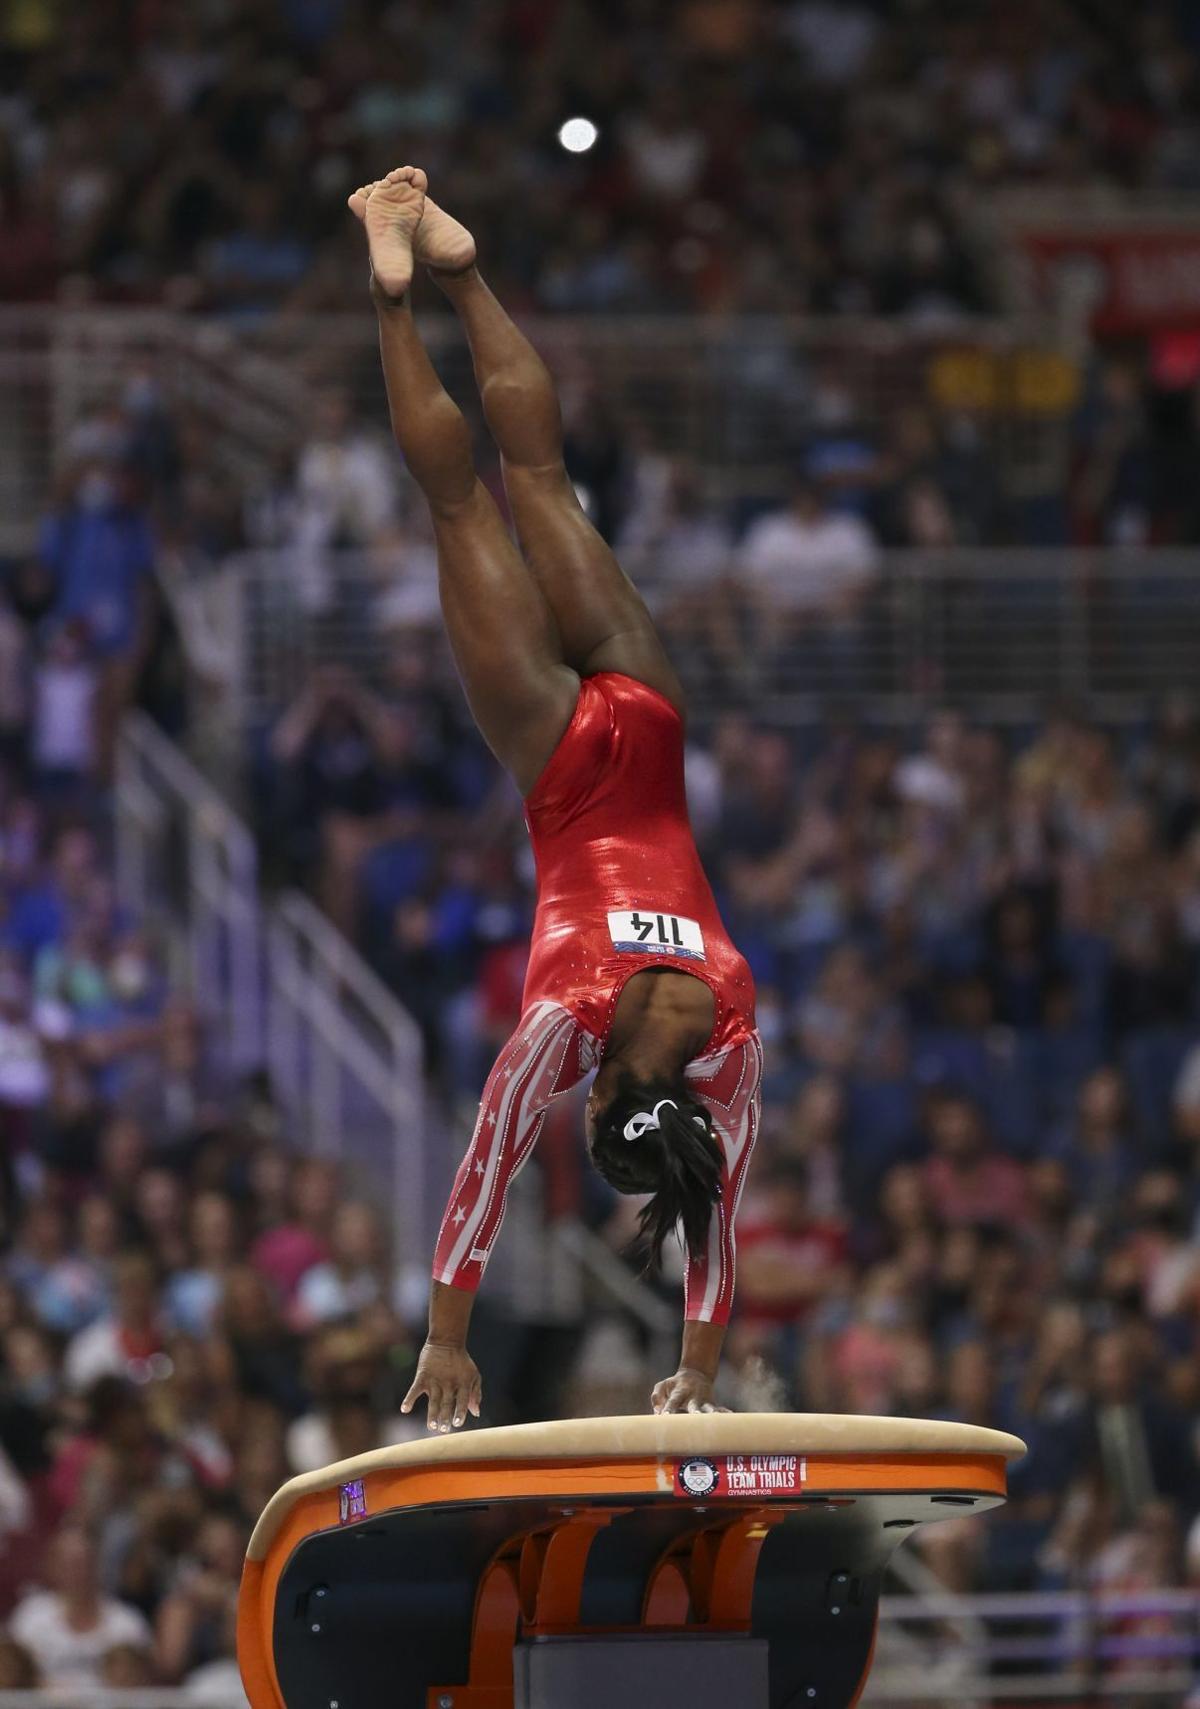 St. Louis Sports Commission to pursue 2024 Olympic gymnastics trials